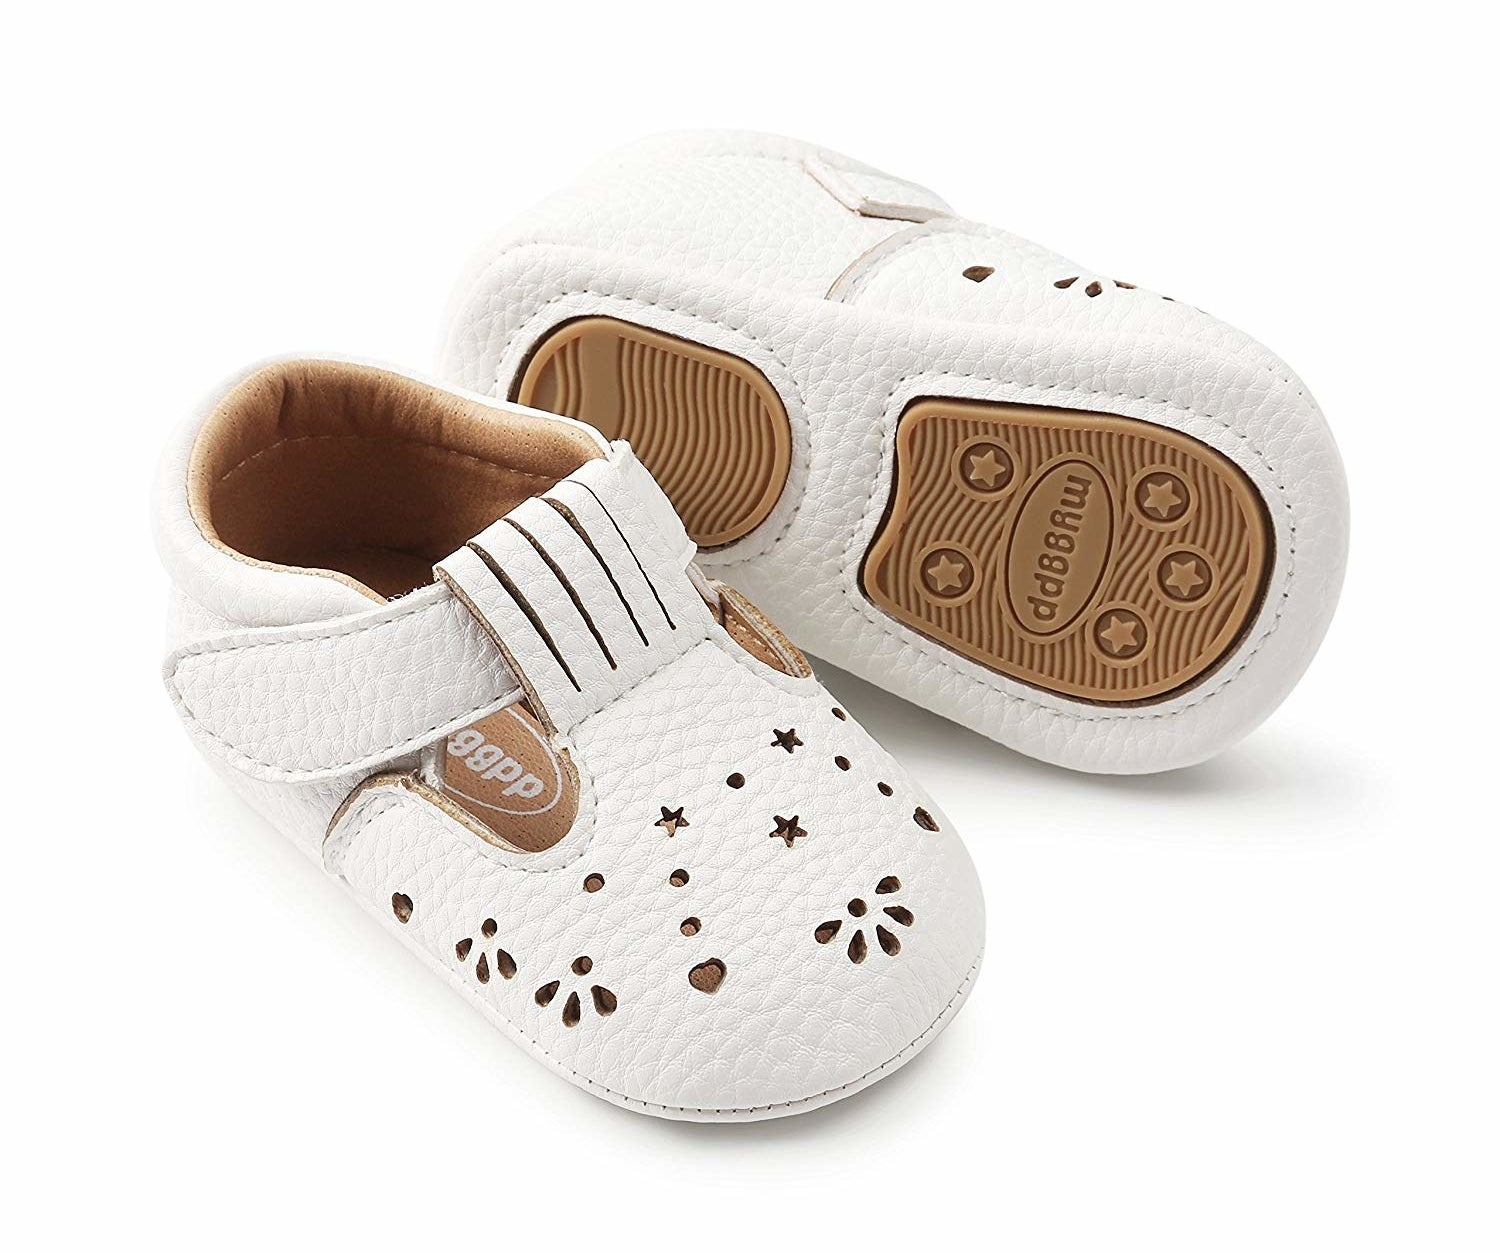 Egmy Baby Shoes Baby 3-12 Months Sequins Soft Sole Warm Shoes Boots 